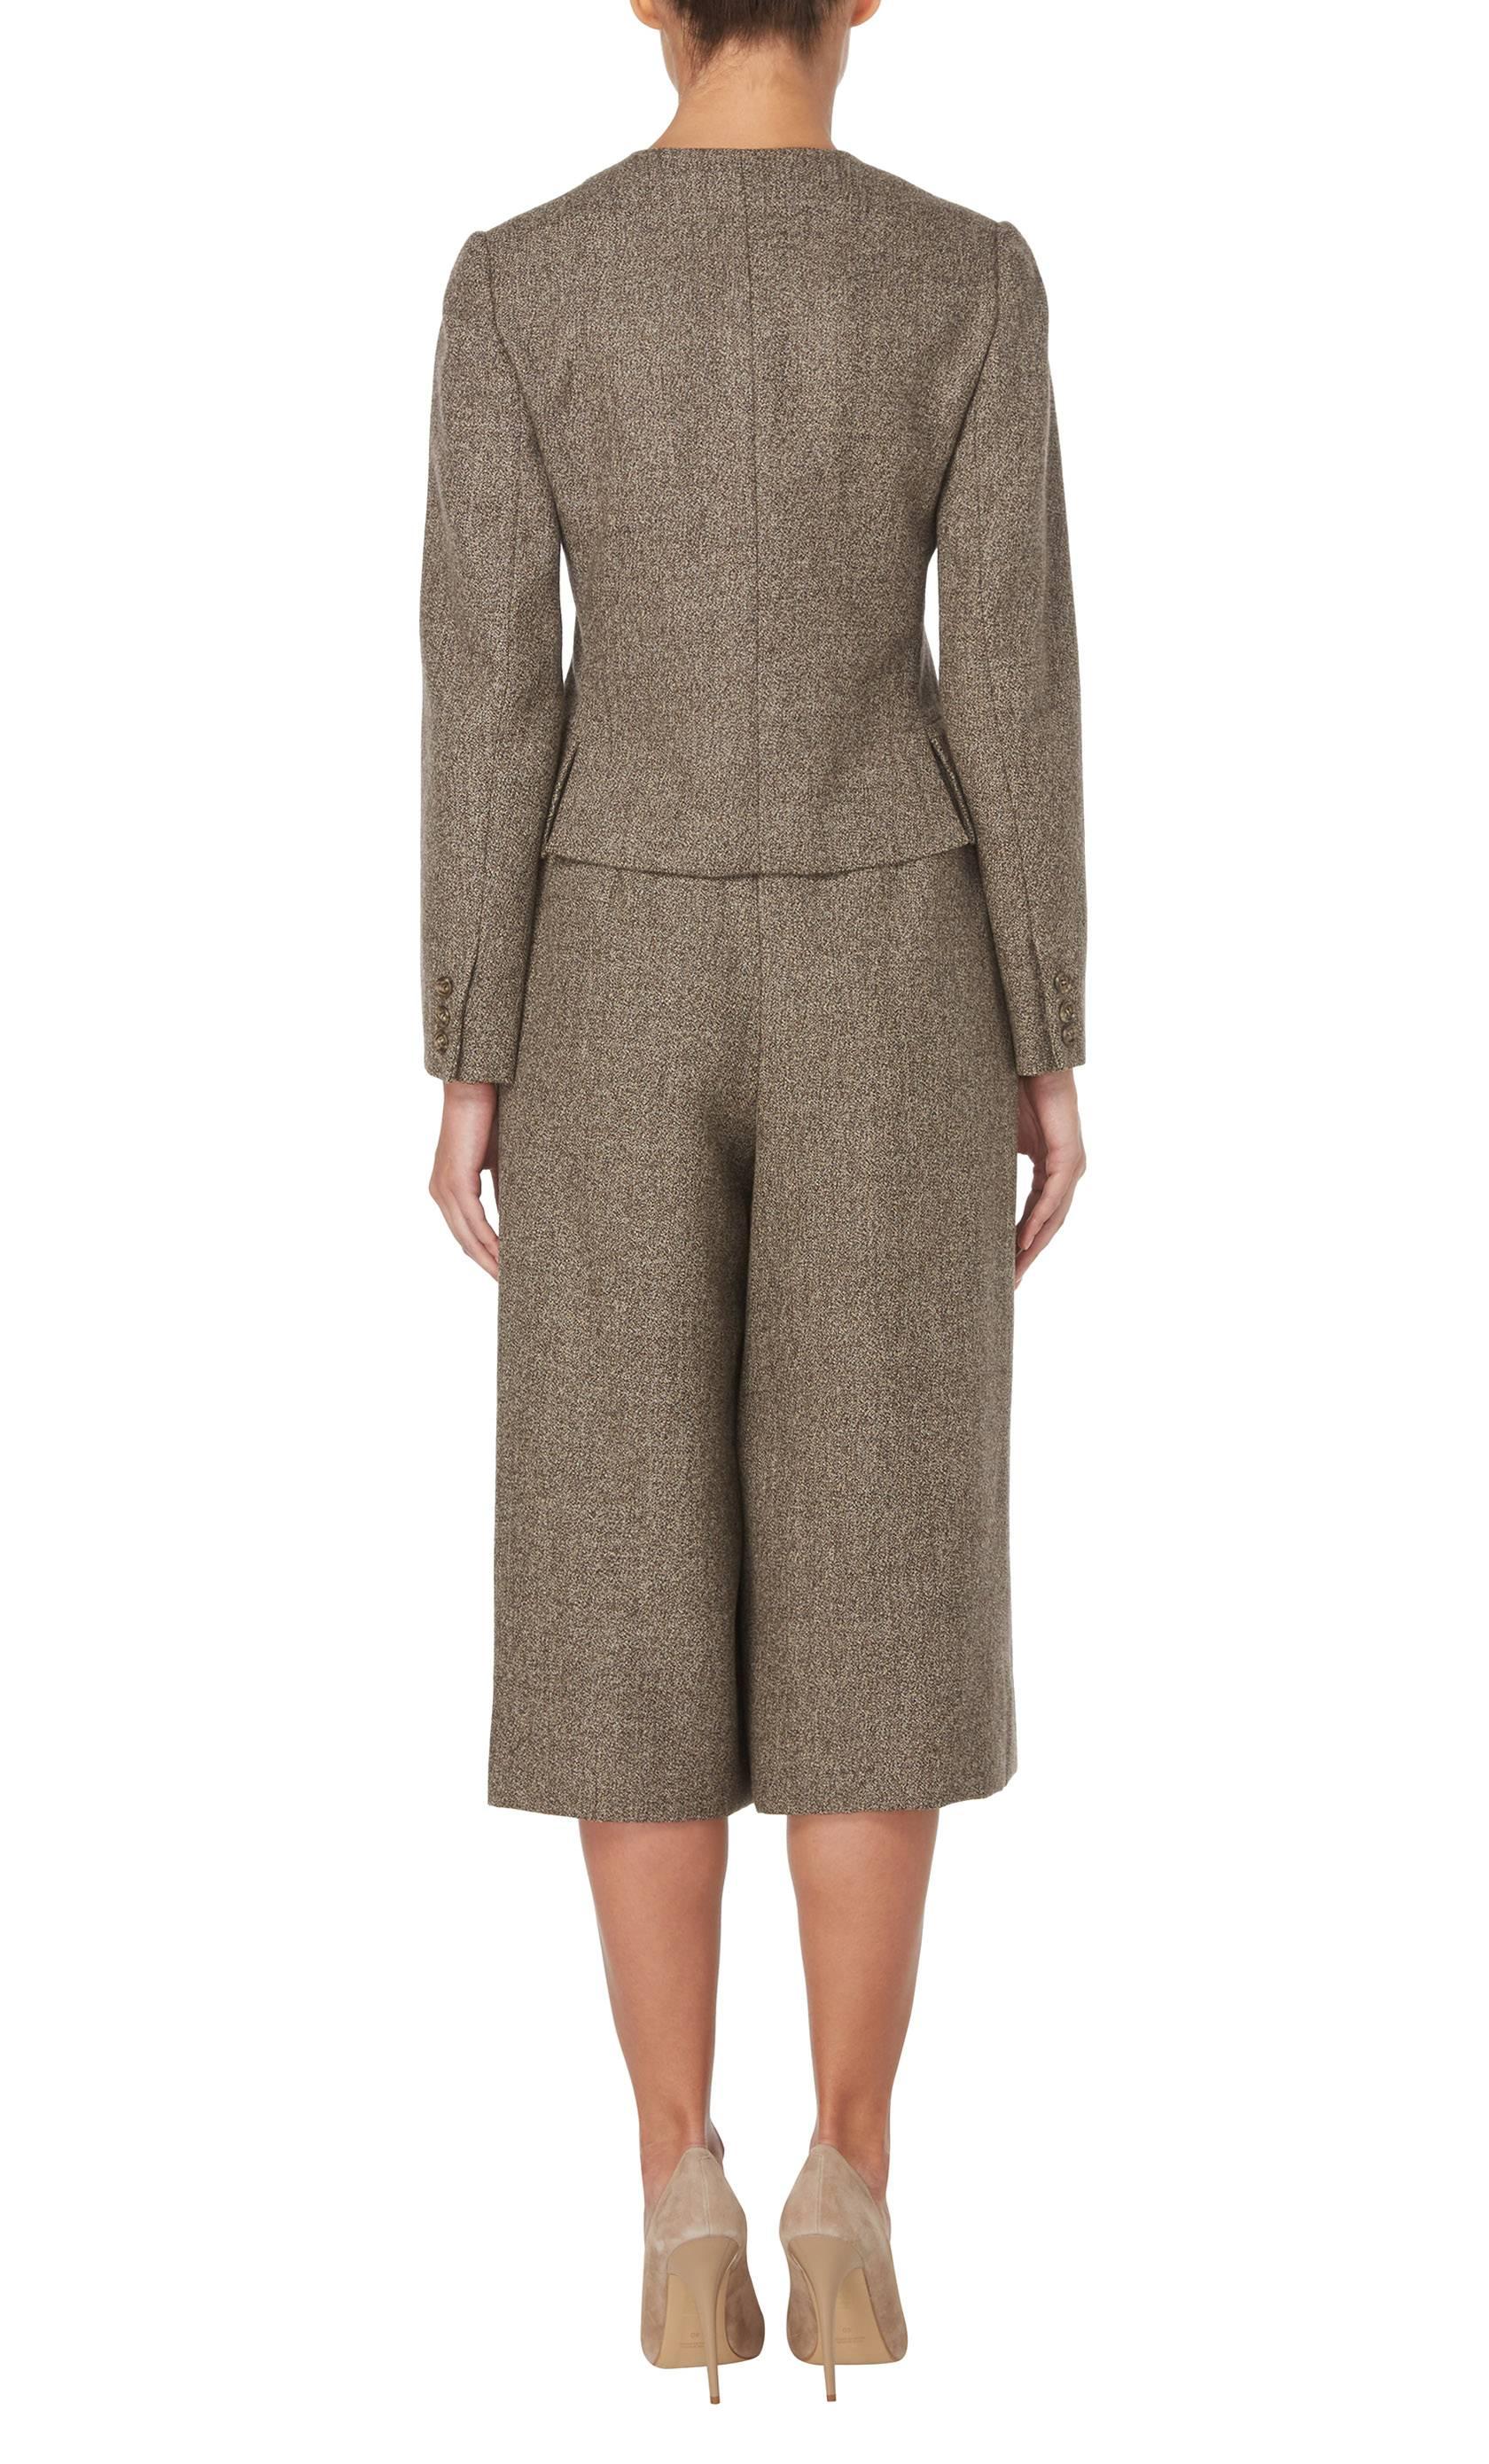 Bill Blass brown tweed culotte suit, circa 1972 In Excellent Condition For Sale In London, GB